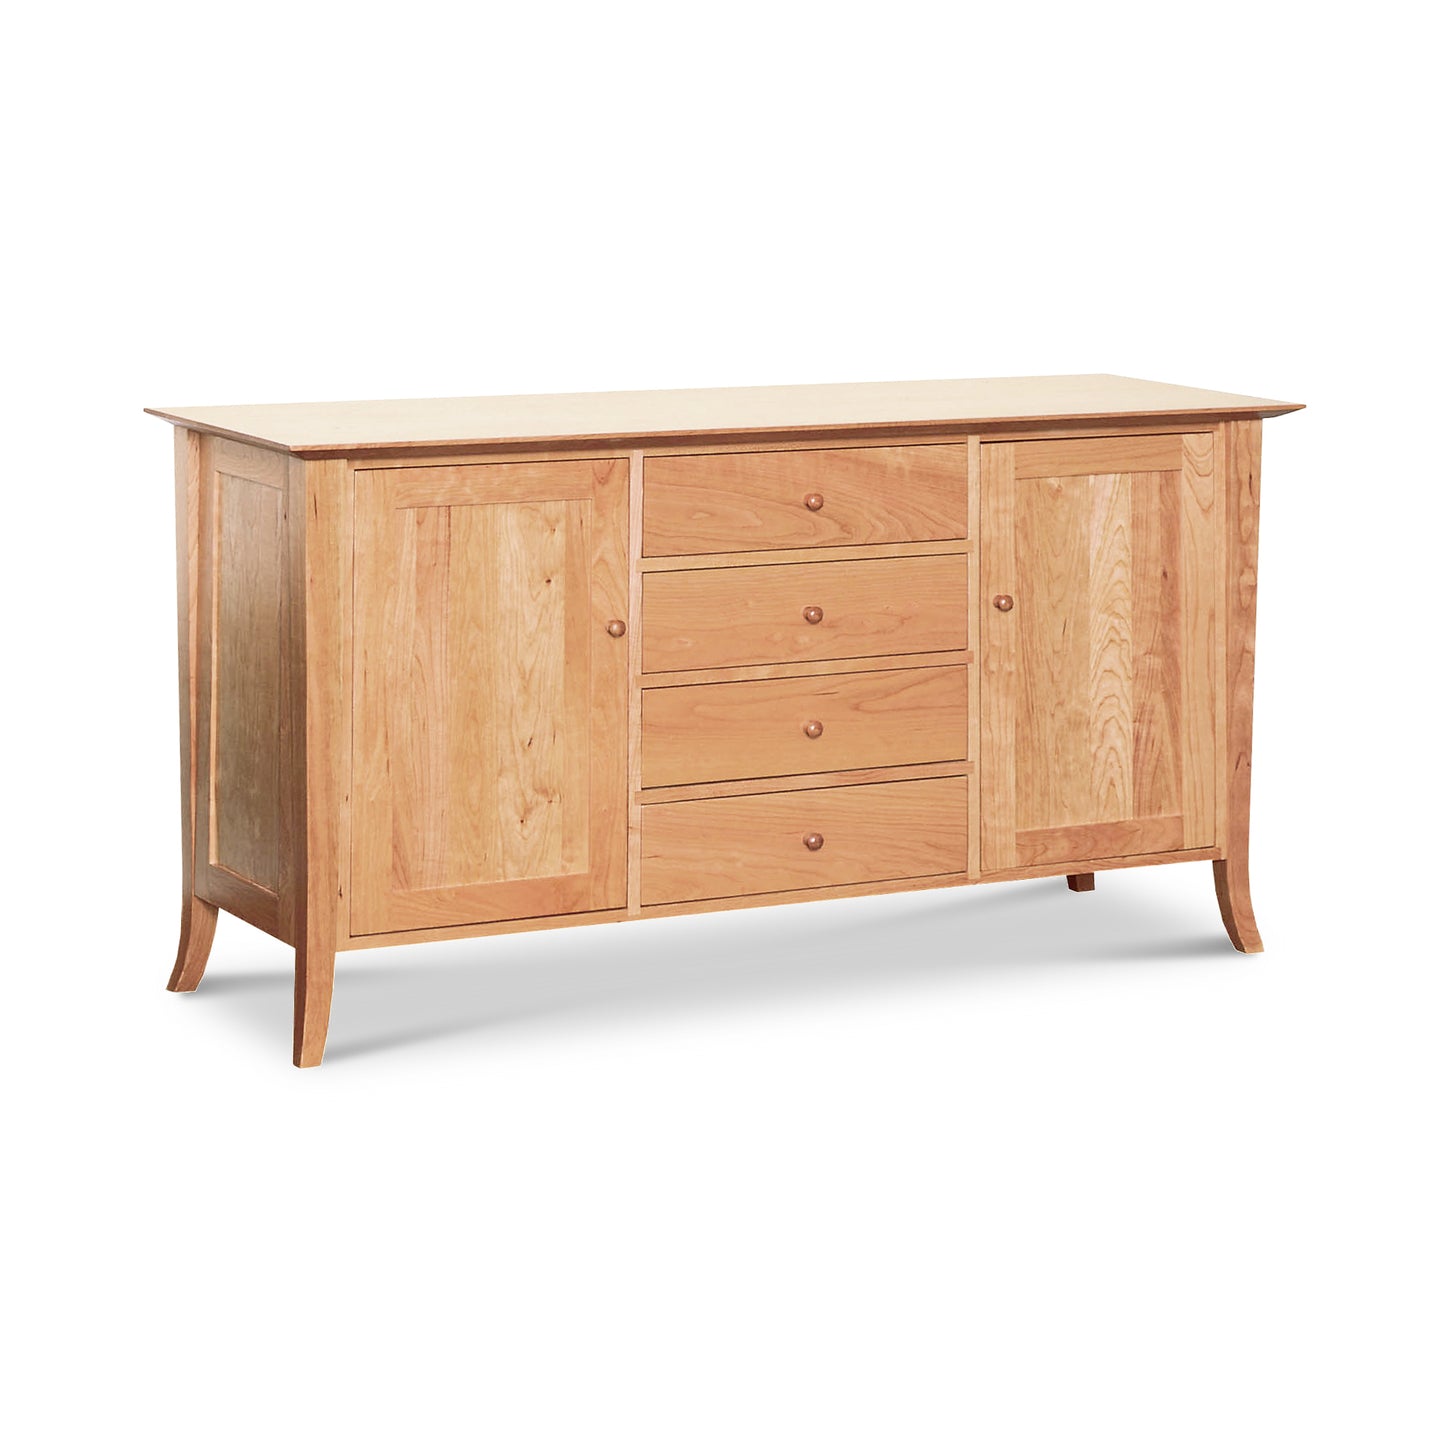 A large wooden sideboard with natural cherry finish, featuring drawers and Lyndon Furniture craftsmanship.